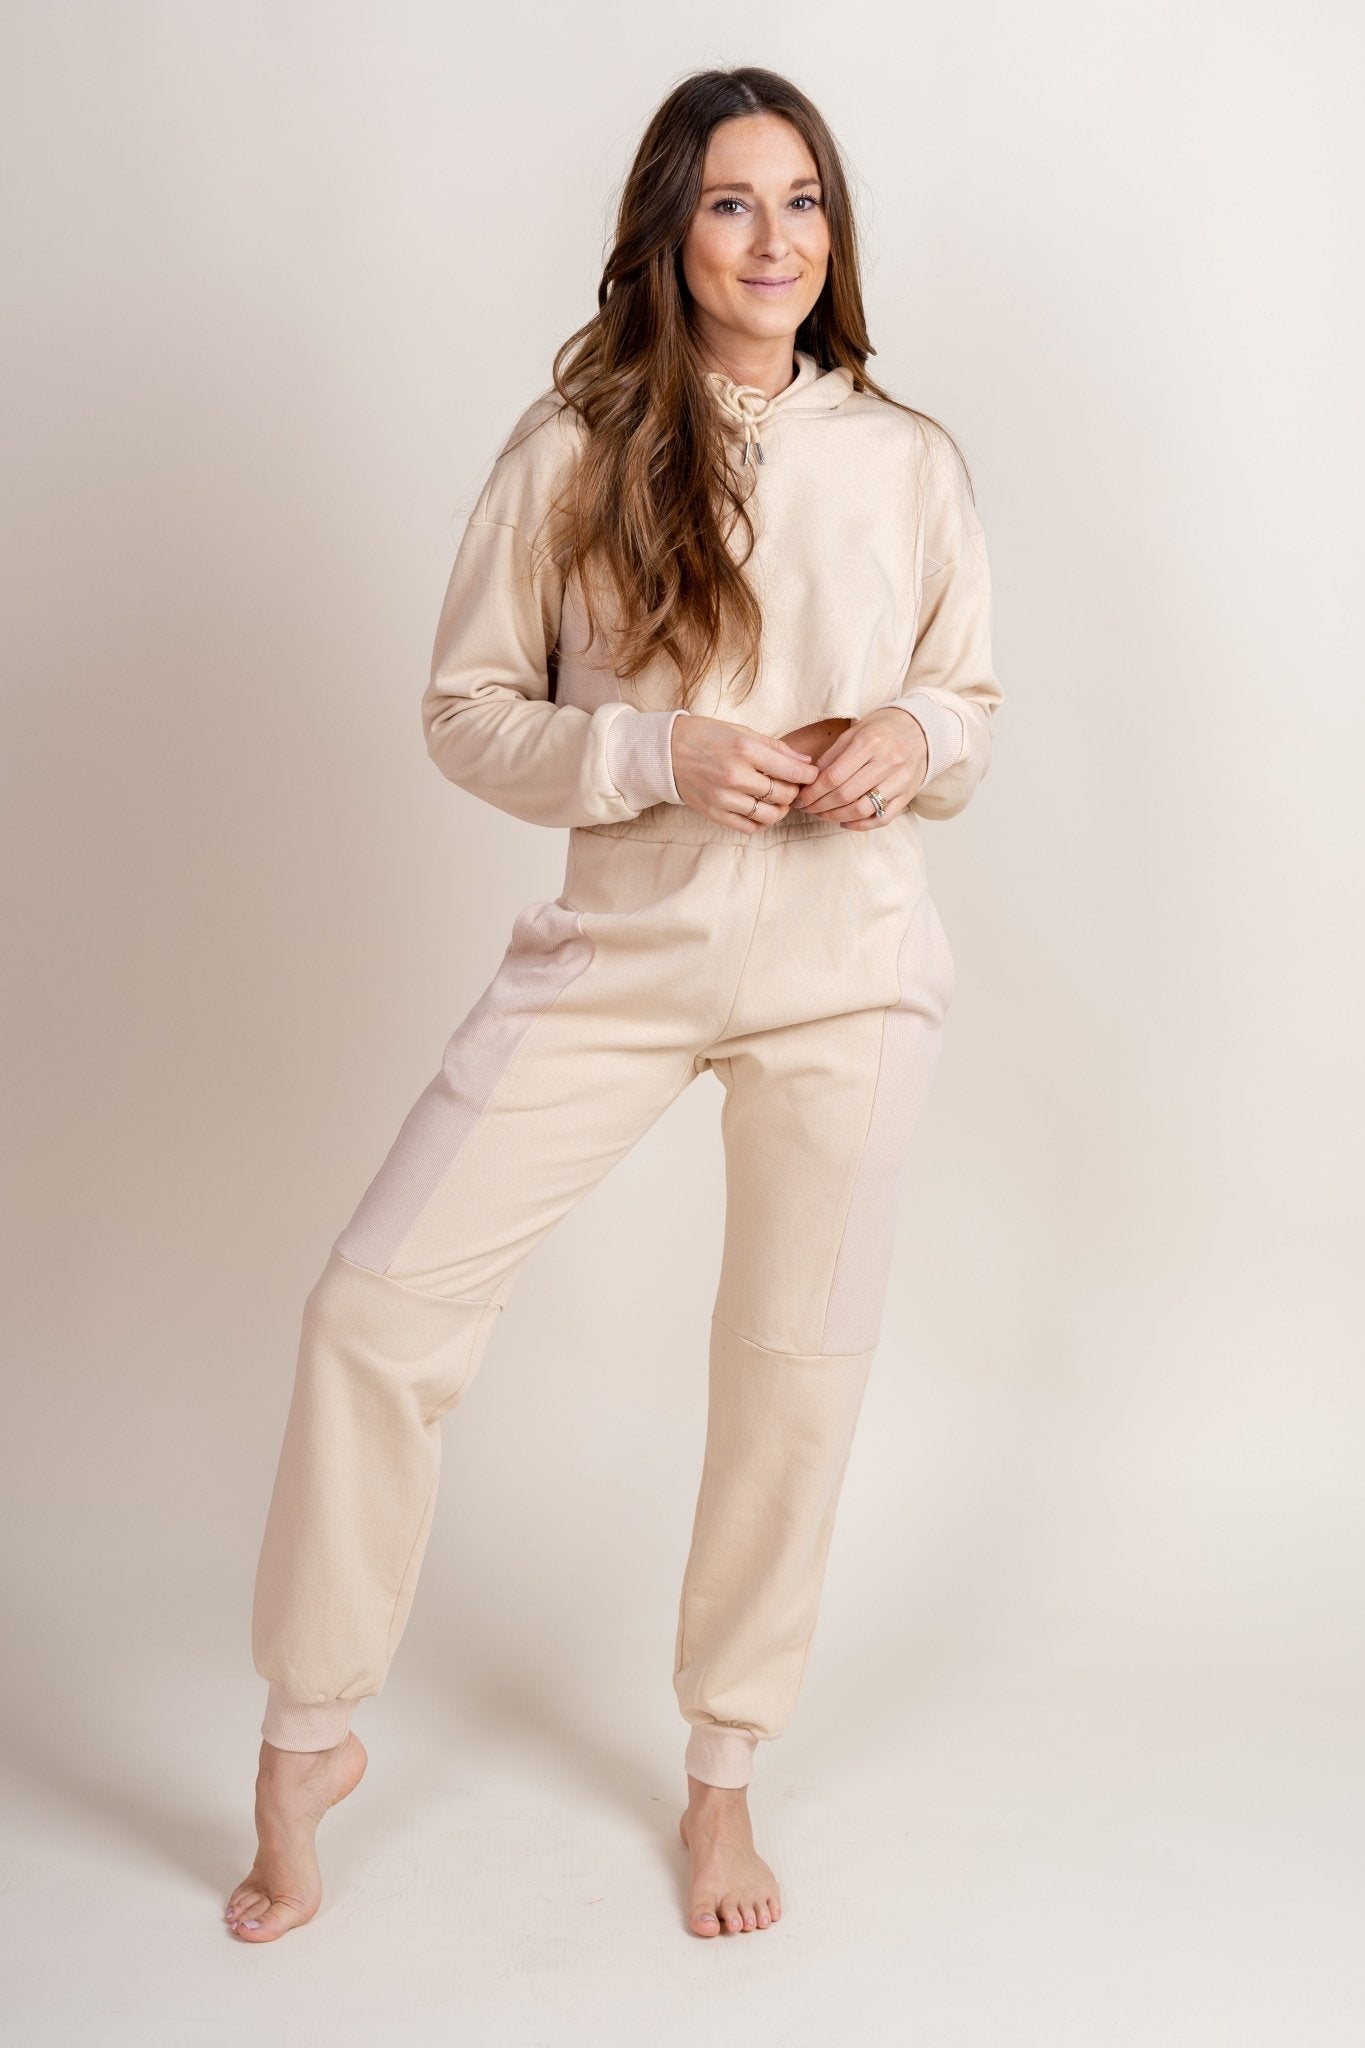 Rib contrast joggers natural - Adorable joggers - Stylish Comfortable Outfits at Lush Fashion Lounge Boutique in OKC